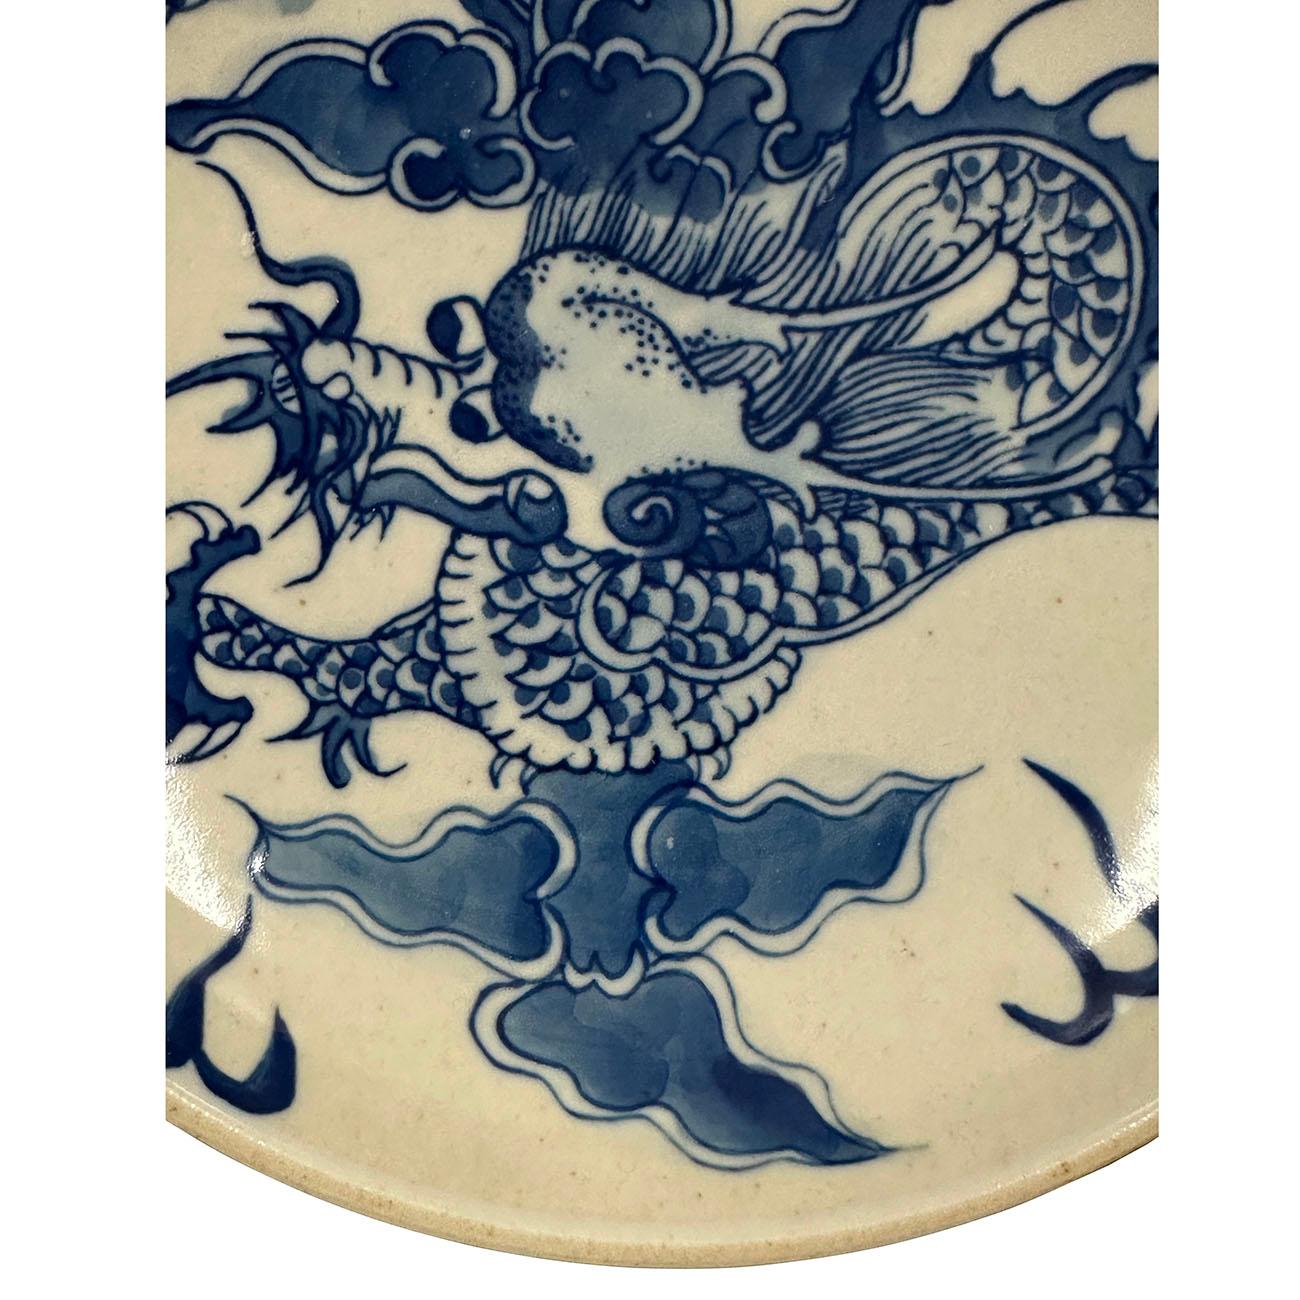 This Vintage Blue and White Porcelain Plate is hand made with hand Paint dragon design on it. Very good quality porcelain and beautiful pattern. it will be a beautiful decoration piece in your lovely home. Don't miss it.

Size: 1.25in H x 6in